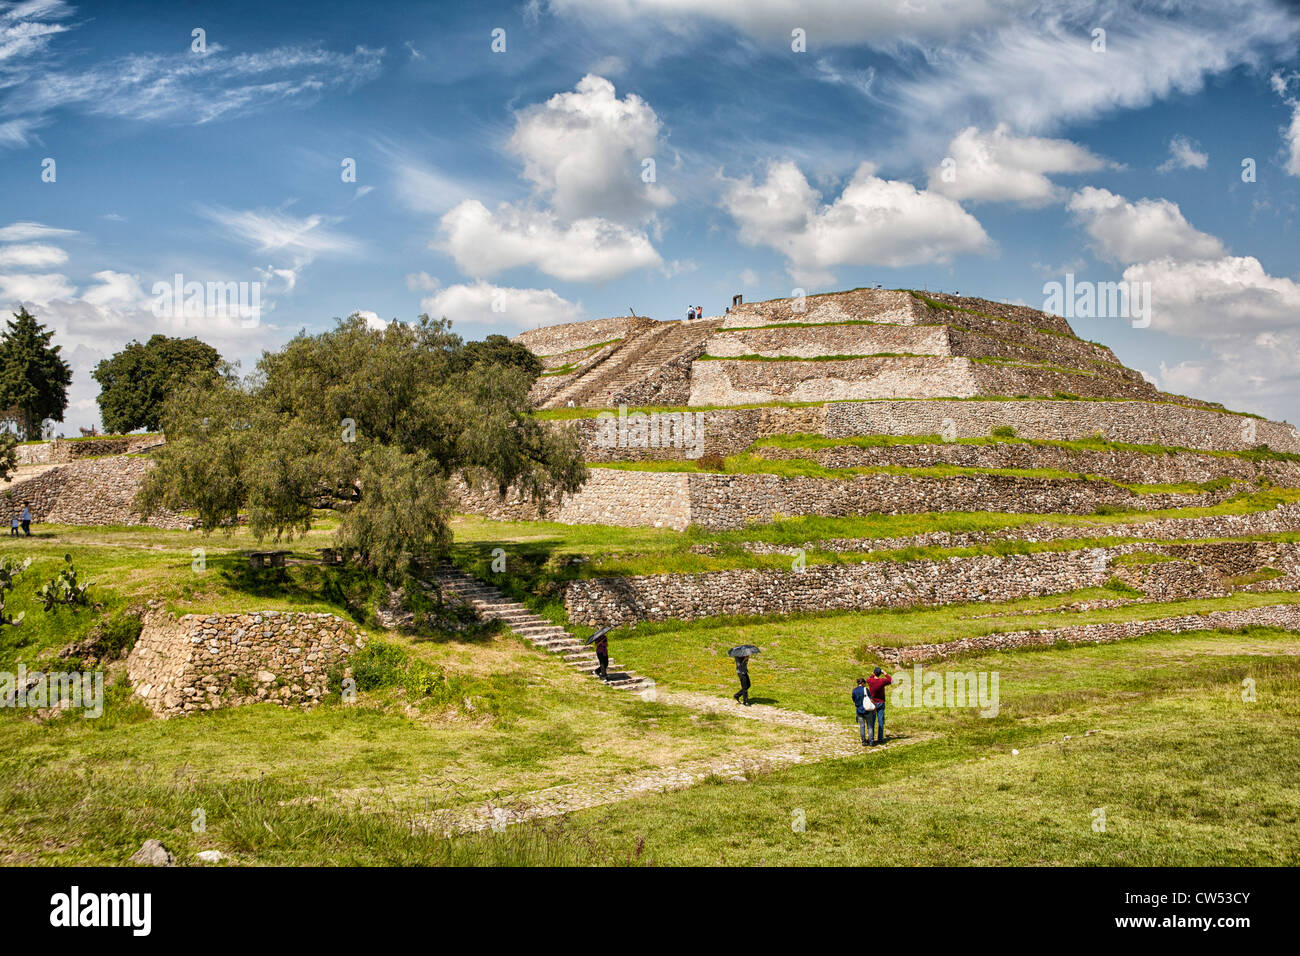 Pyramid of the Flowers - Xochitecatl archaeological site in the state of Tlaxcala, Mexico Stock Photo